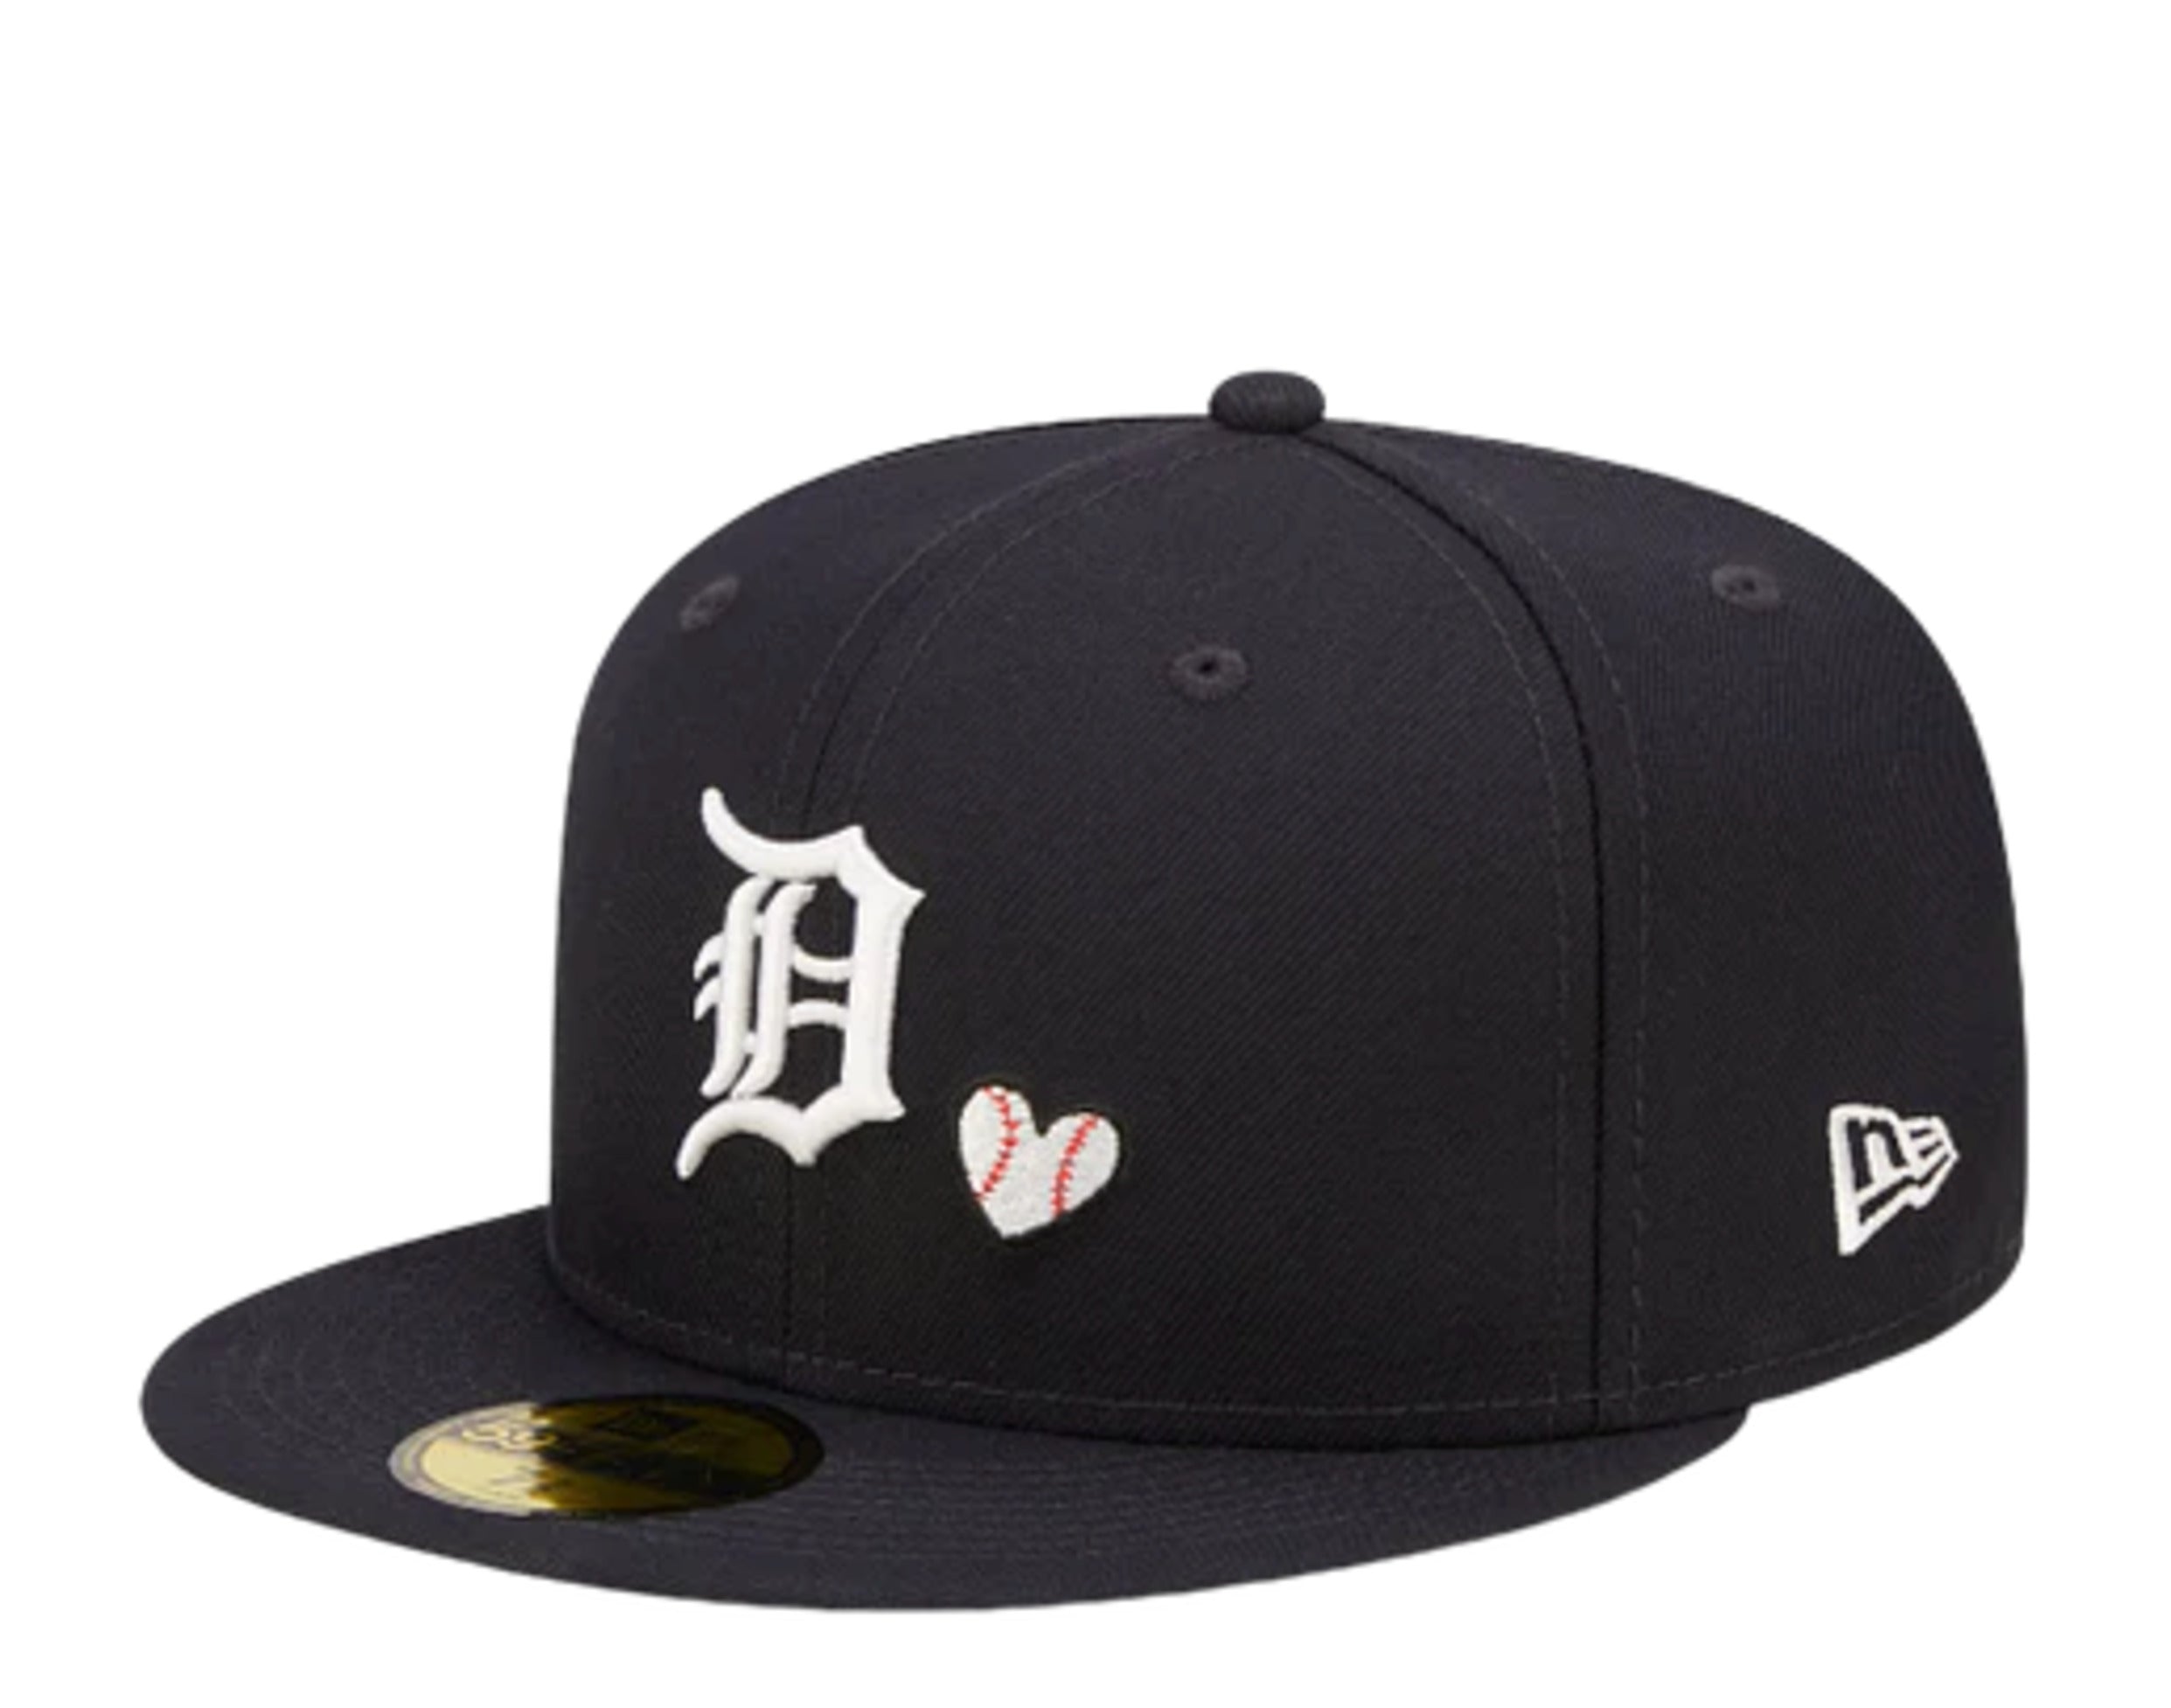 Official New Era Cordvisor Detroit Tigers Stone 59FIFTY Fitted Cap  B9532_844 B9532_844